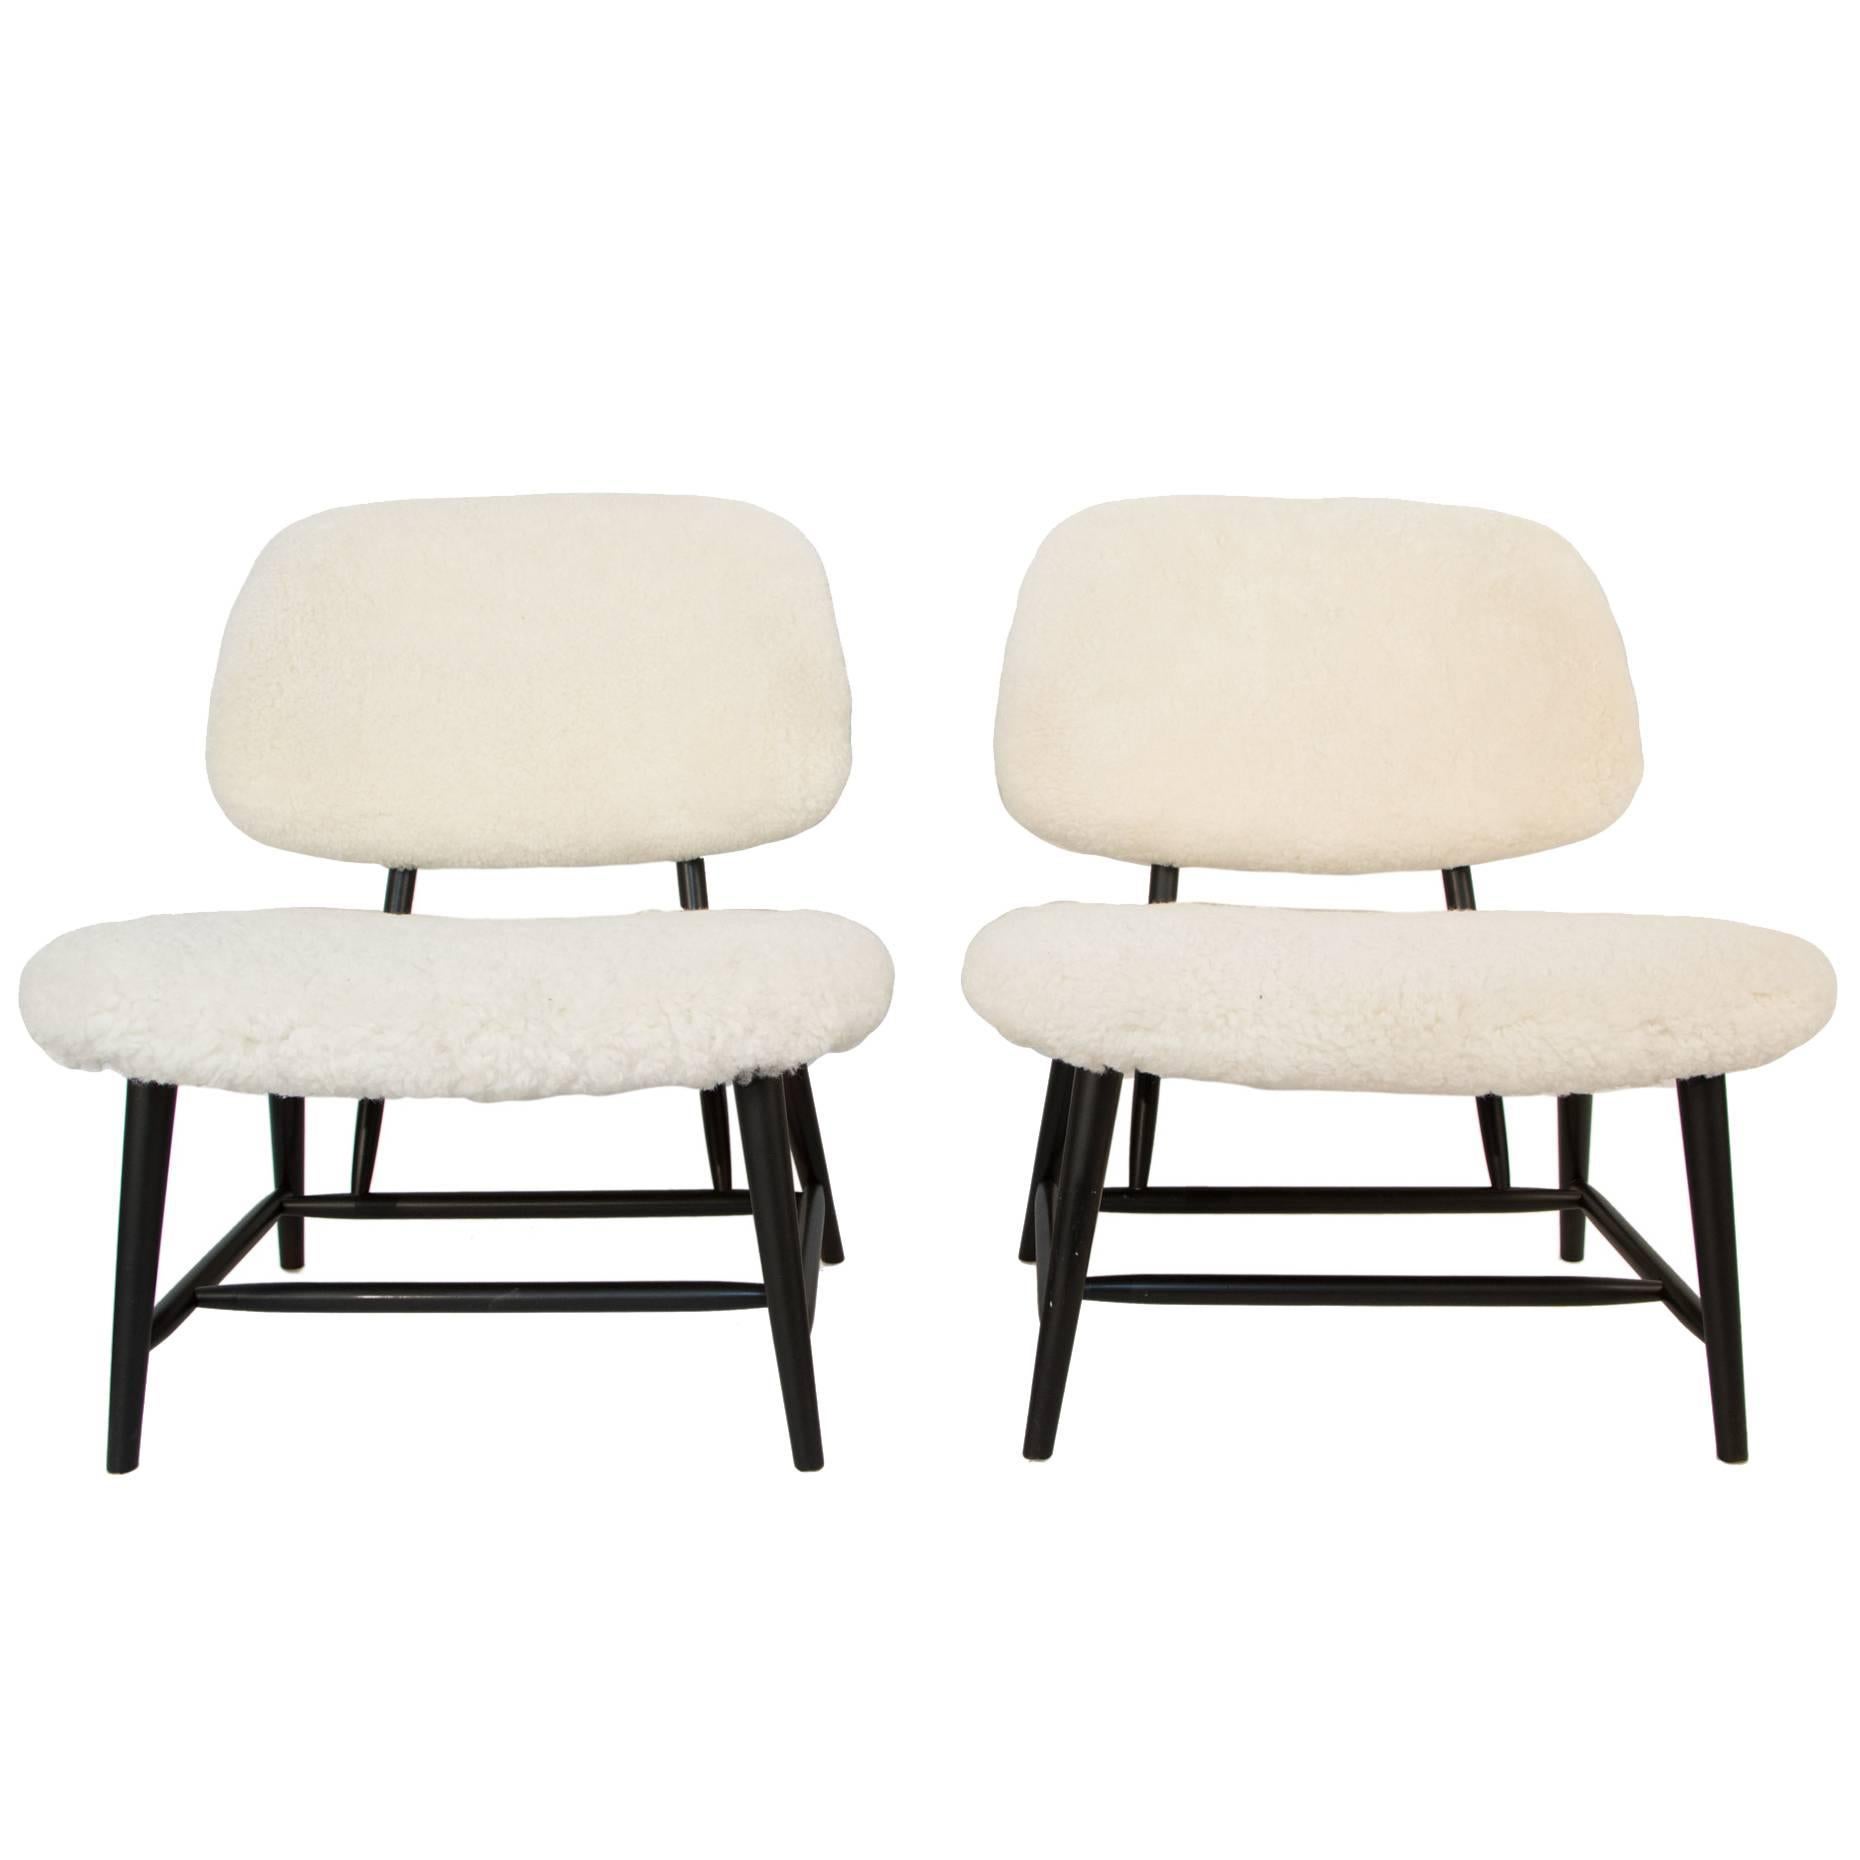 Pair of Sheepskin Lounge Chairs by Alf Svensson